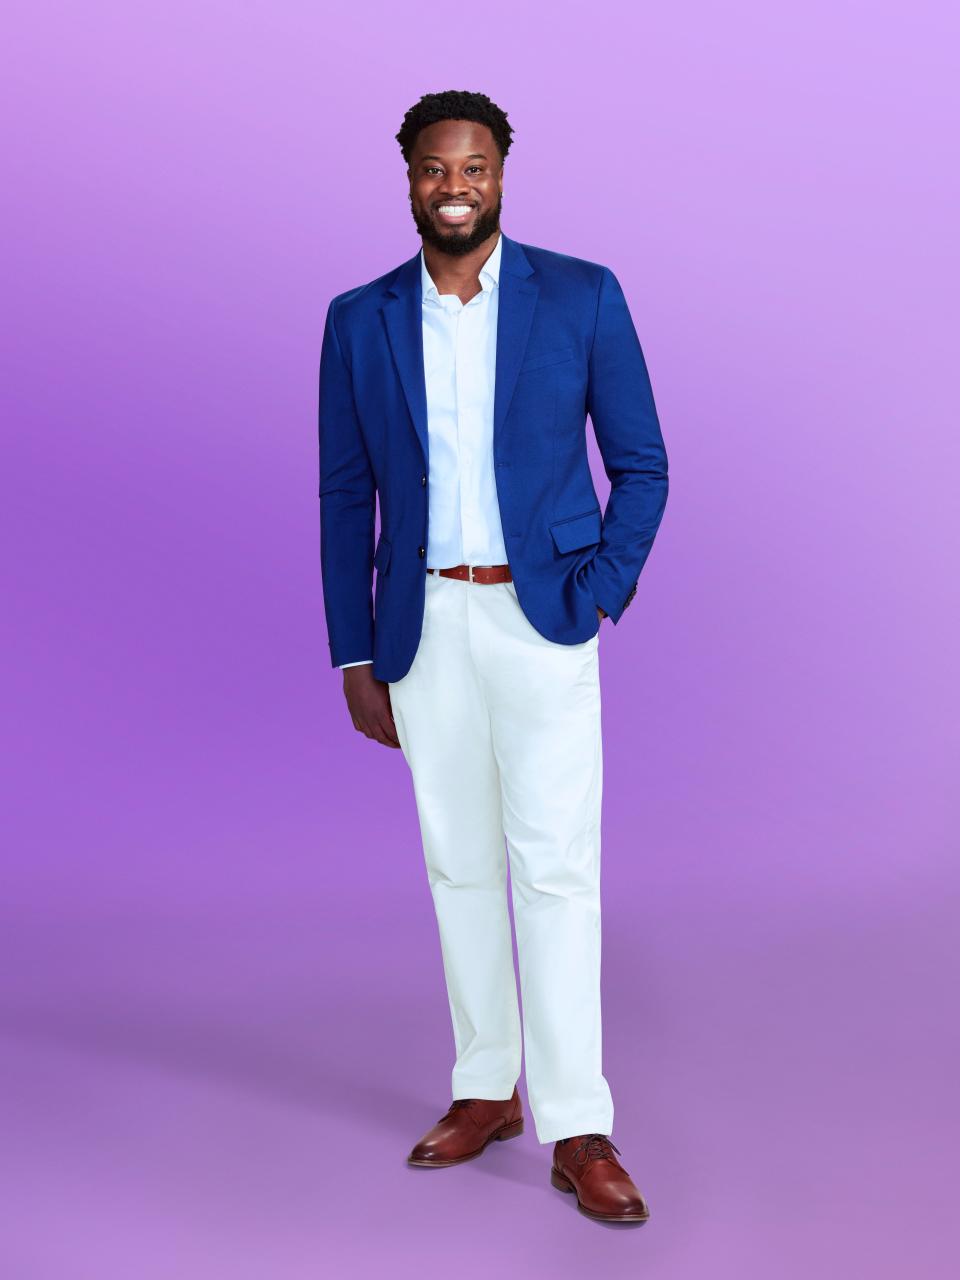 Deion, a contestant on "Love Is Blind" season 6, wearing a blue suit jacket and white pants